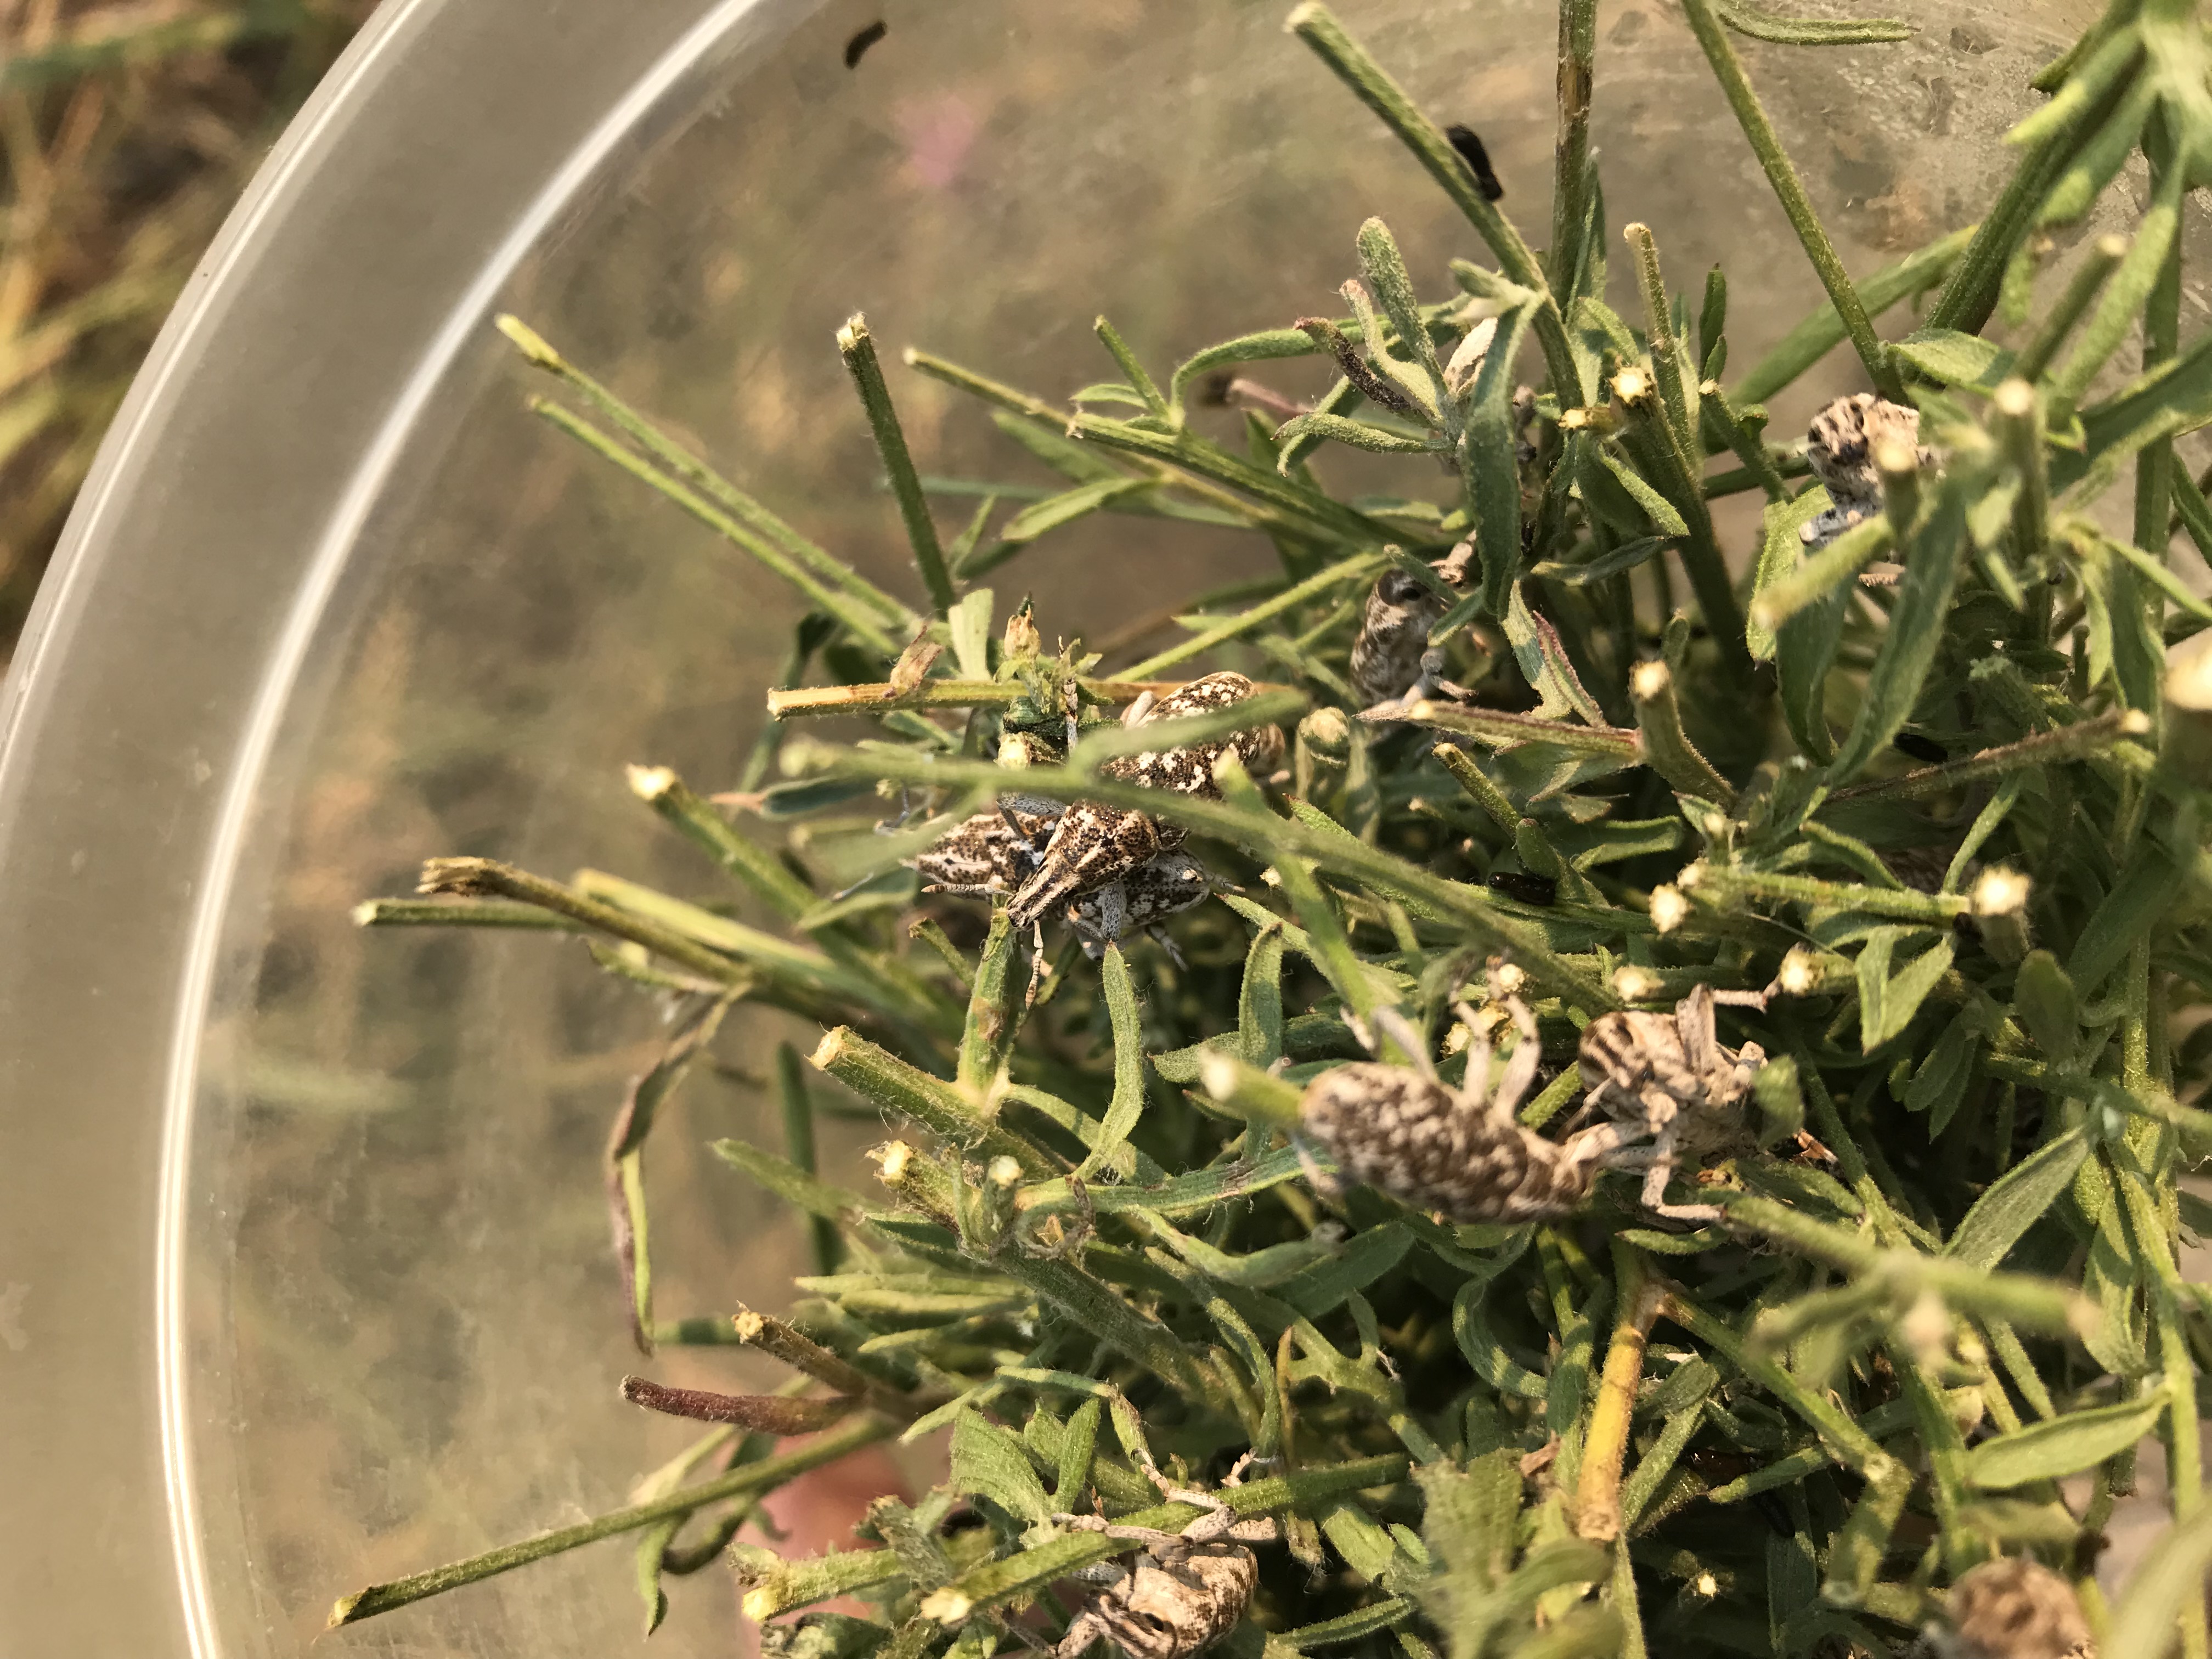 More bioagents released to help control spotted knapweed